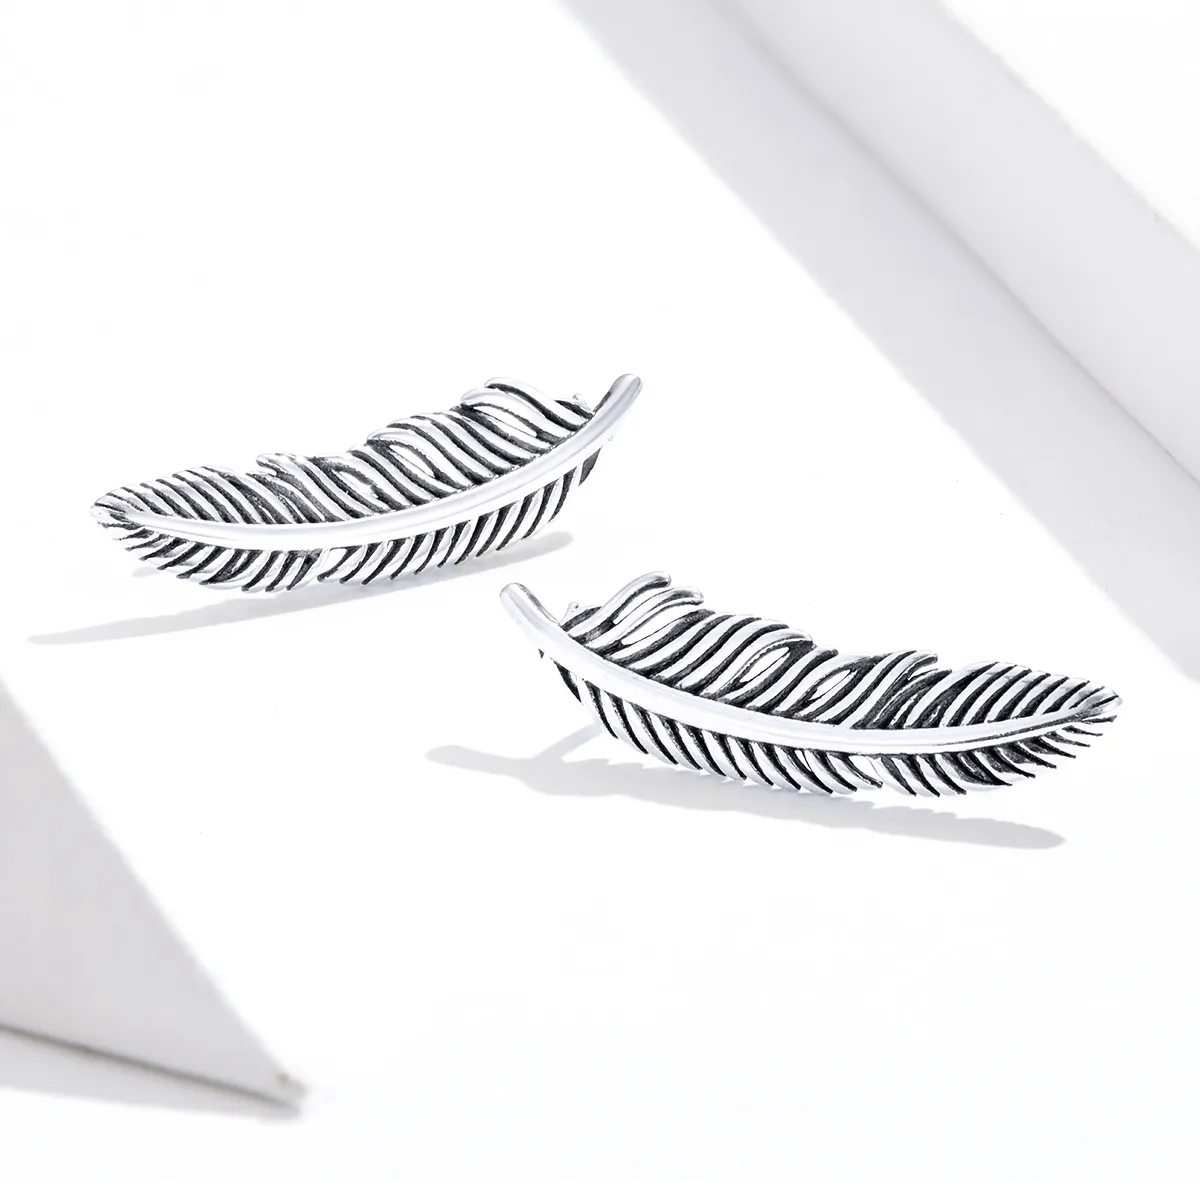 Pandora Style Silver Light As A Feather Stud Earrings - SCE865